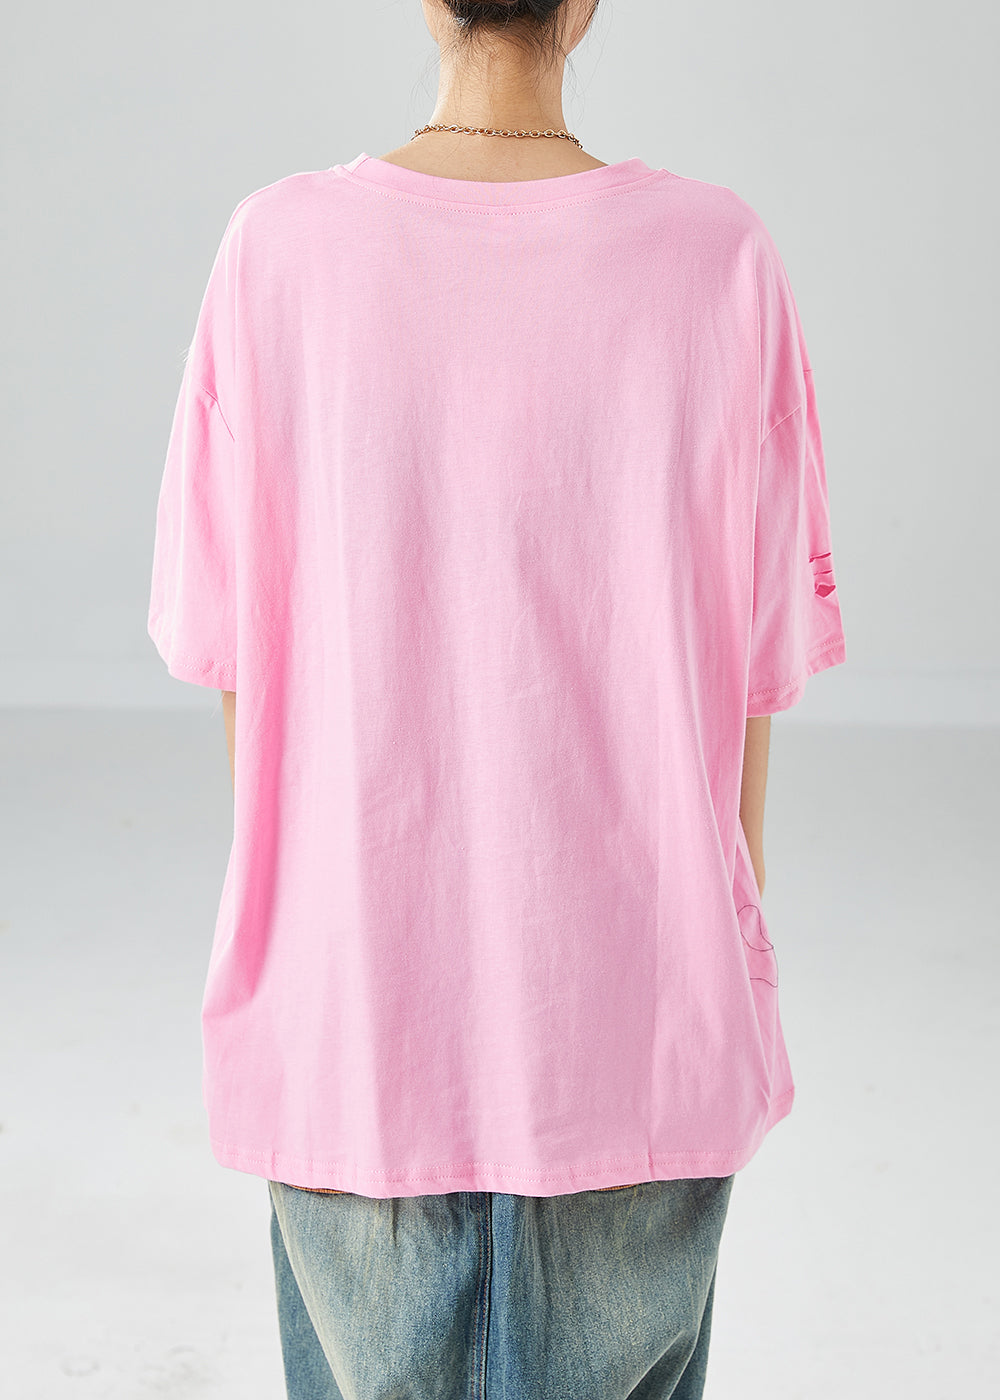 Plus Size Pink Oversized Print Hollow Out Cotton Top Summer